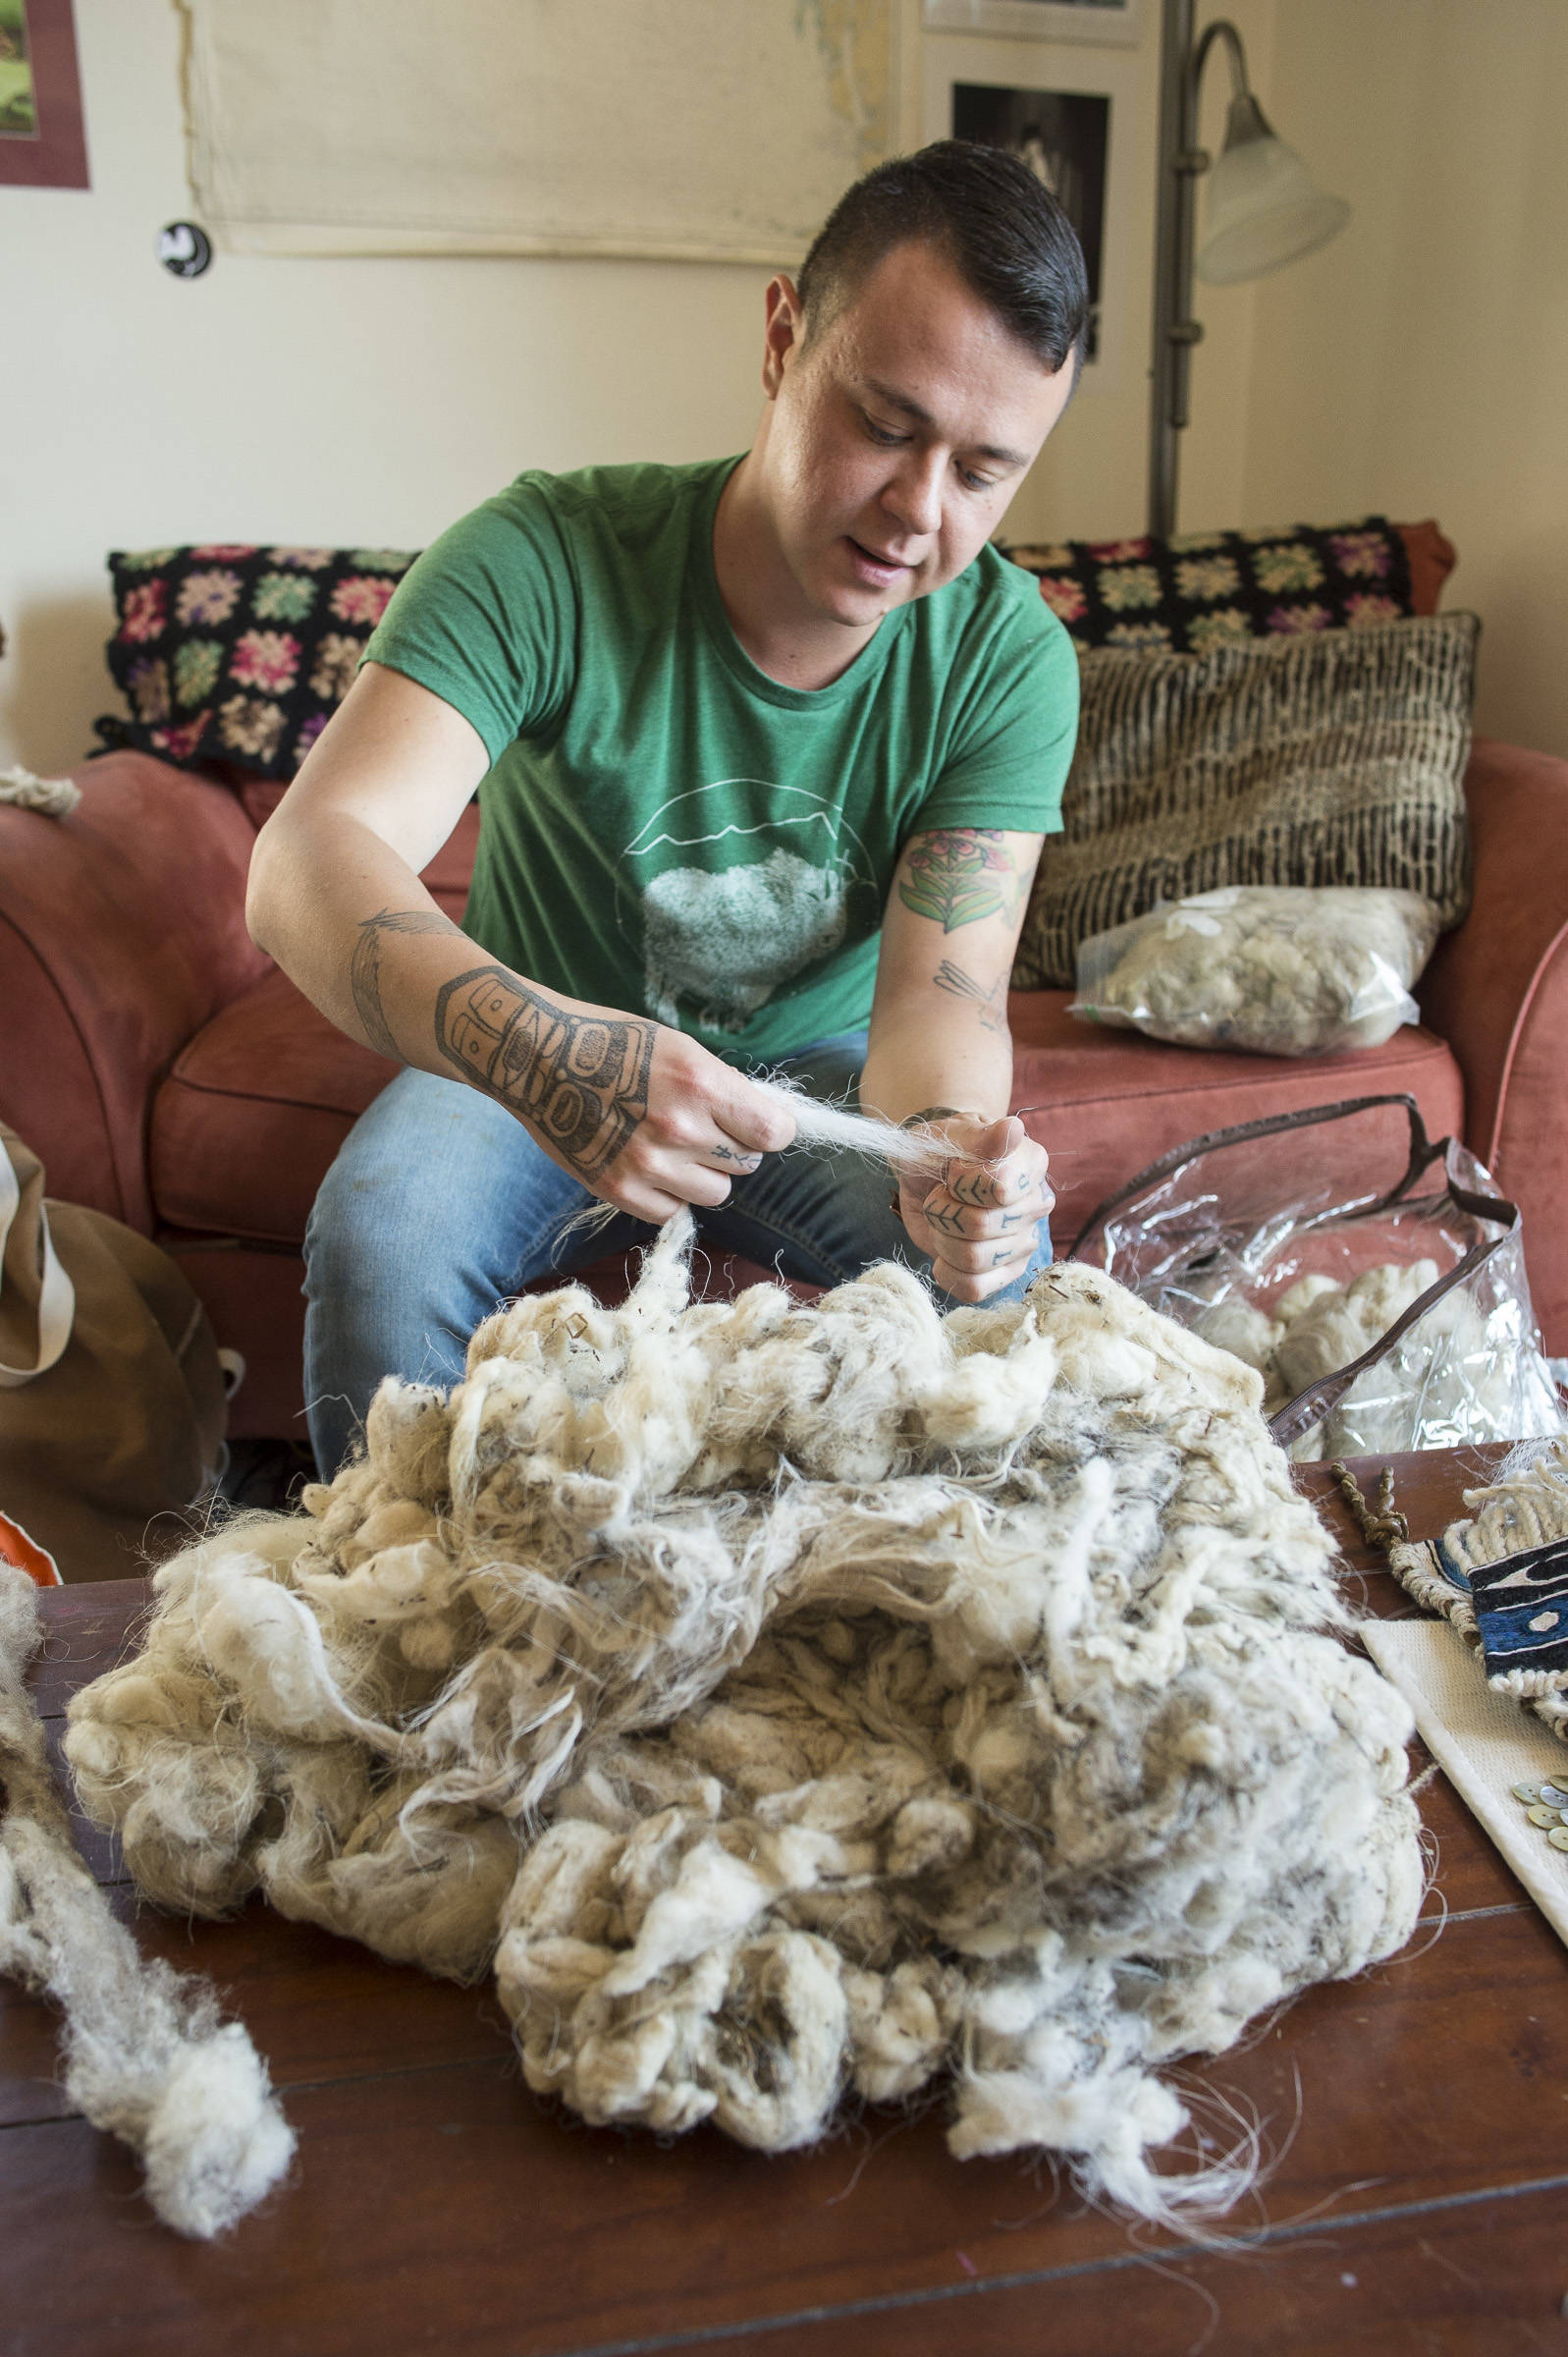 Chilkat weaver Ricky Tagaban pull guard hairs from raw mountain goat fur at his apartment in Juneau on Monday, Sept. 10, 2018. Tagaban said friends collect the fur in the spring when goats lose their winter coat. Tagaban turns the material into wool warp with a cedar bark core ready for his weaving projects or to sell to other weavers. (Michael Penn | Juneau Empire)